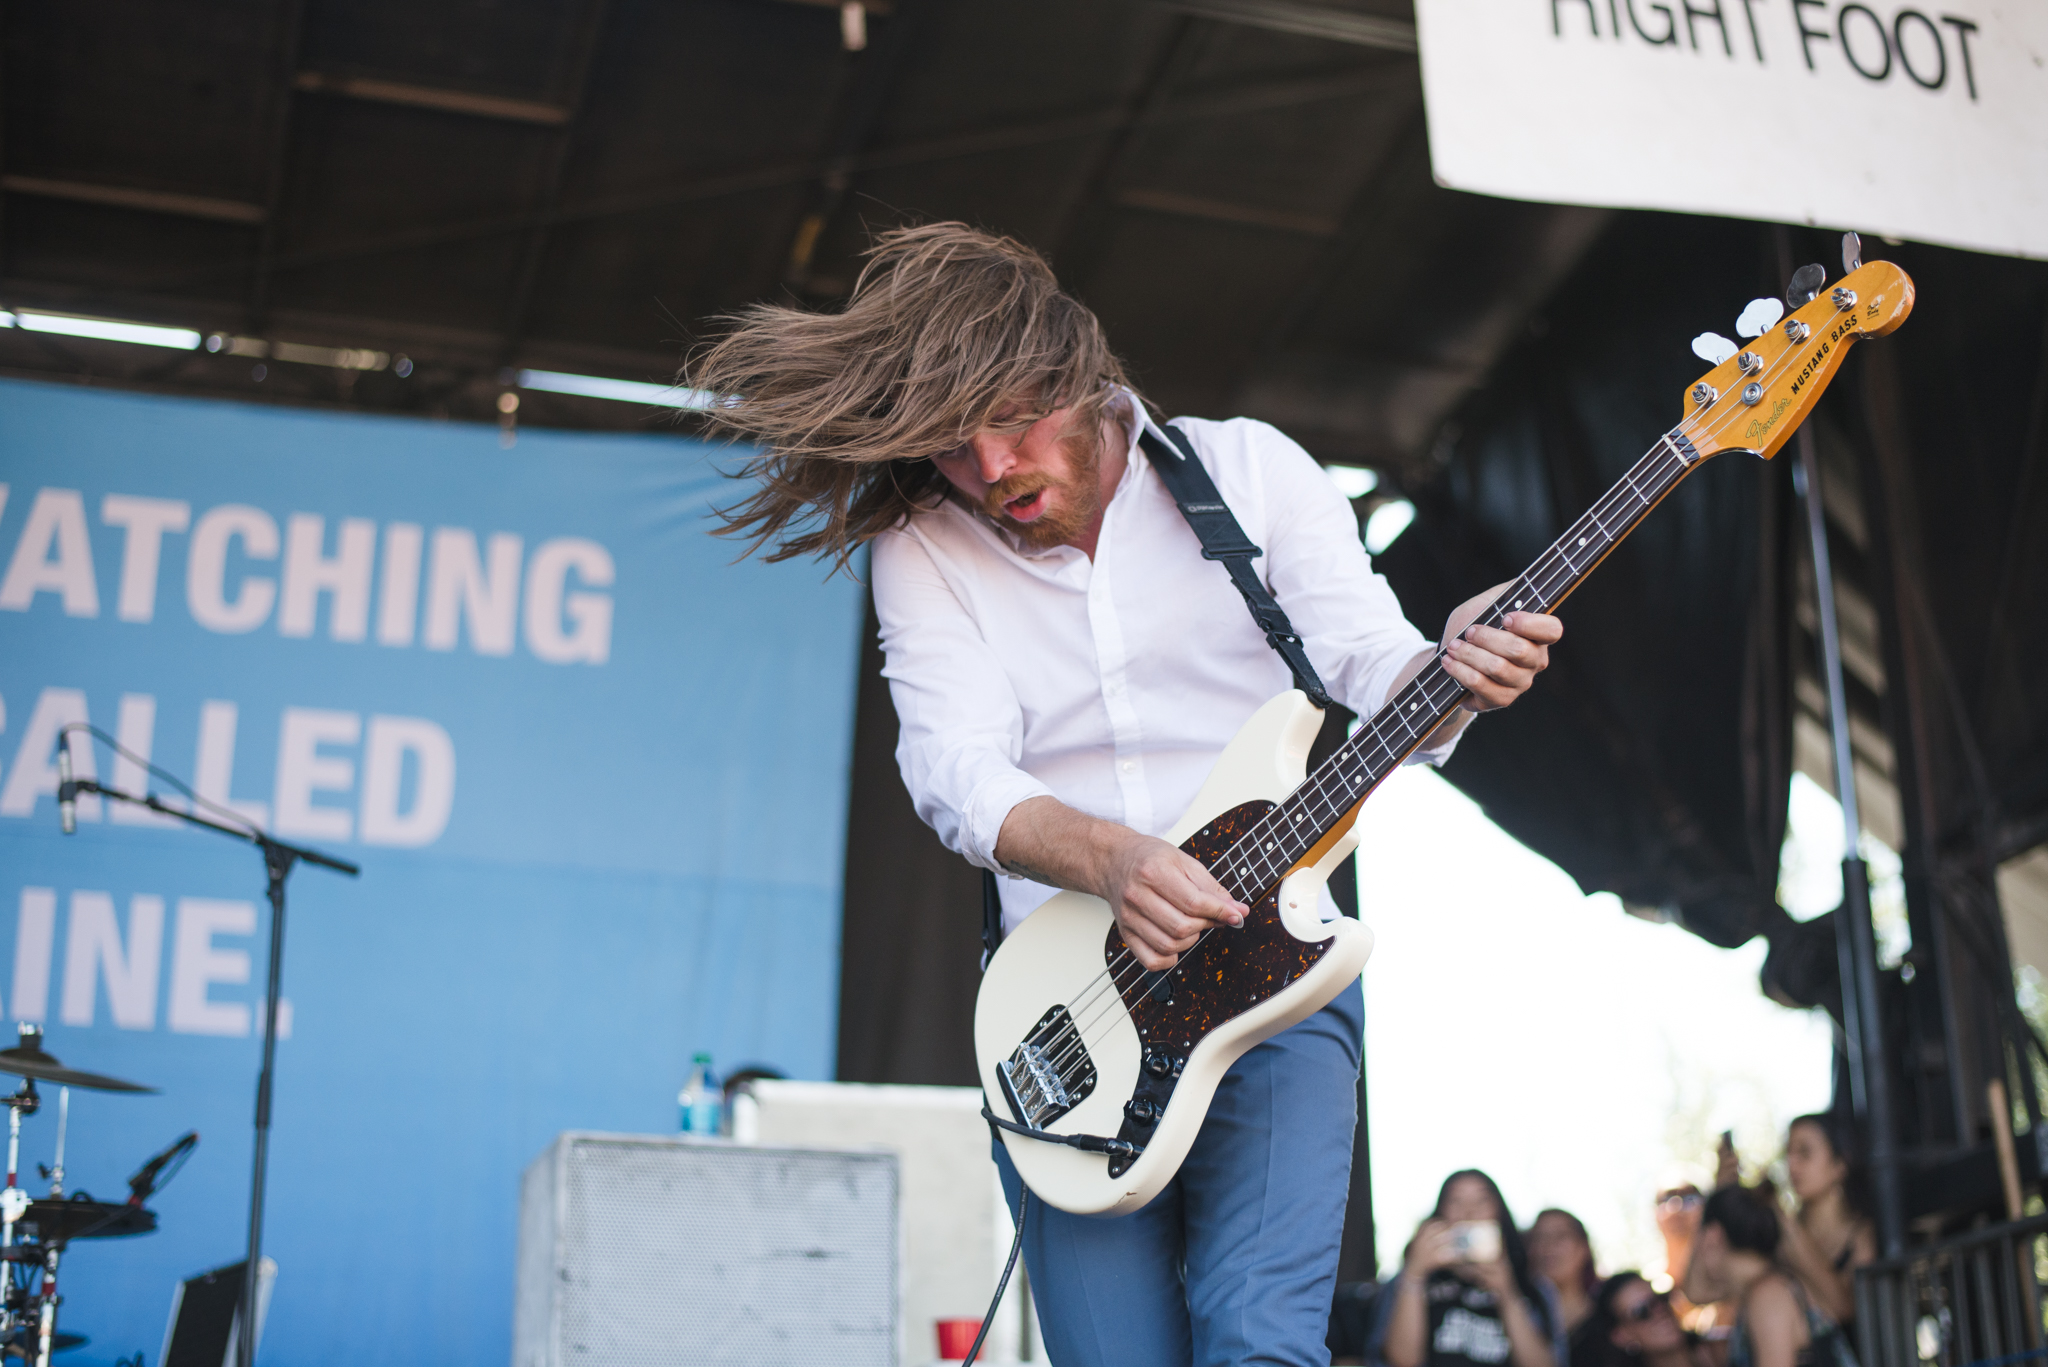 The Maine - Photo by Lindsey Blane